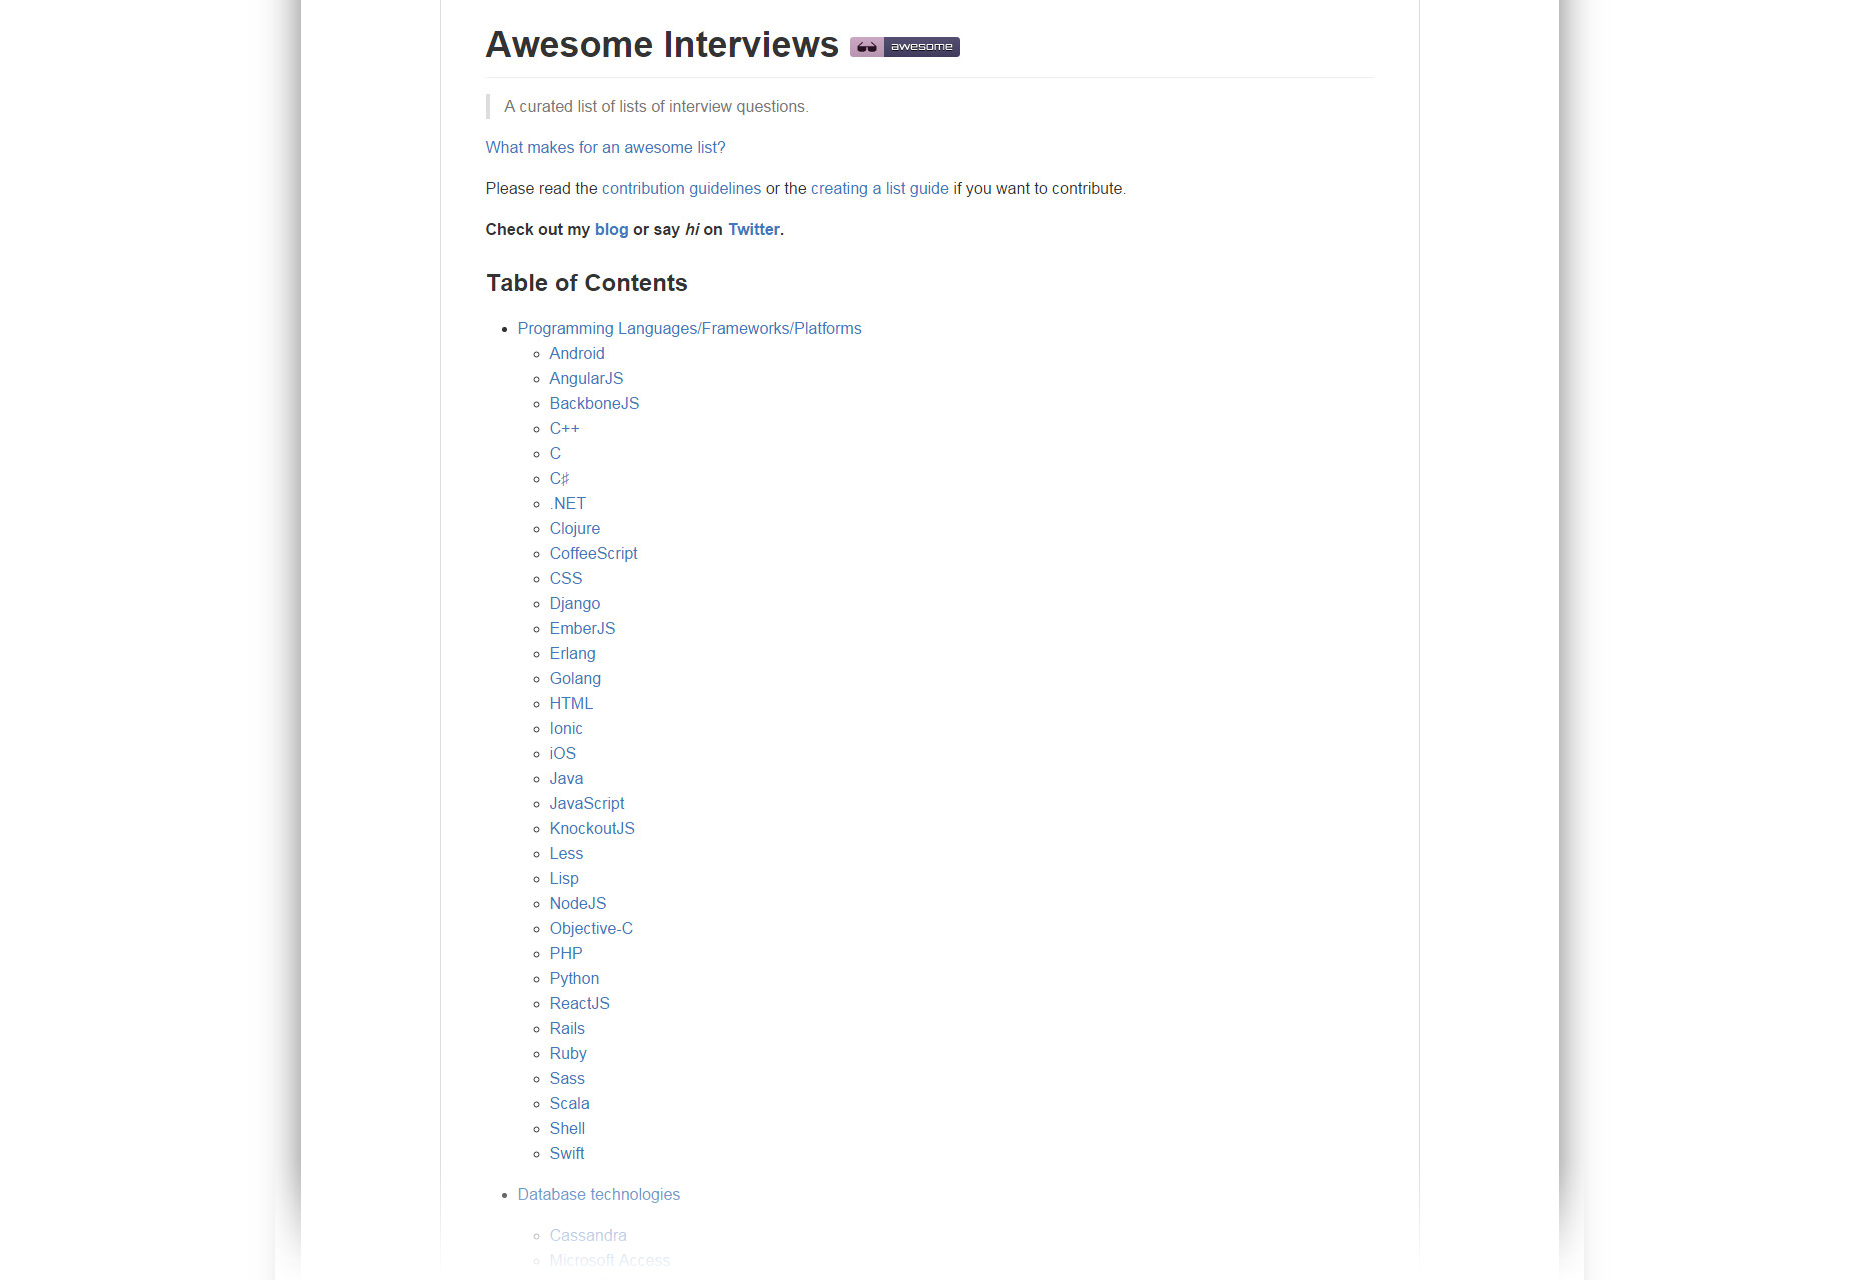 Awesome Interviews: Open Source Development Interviews Collection